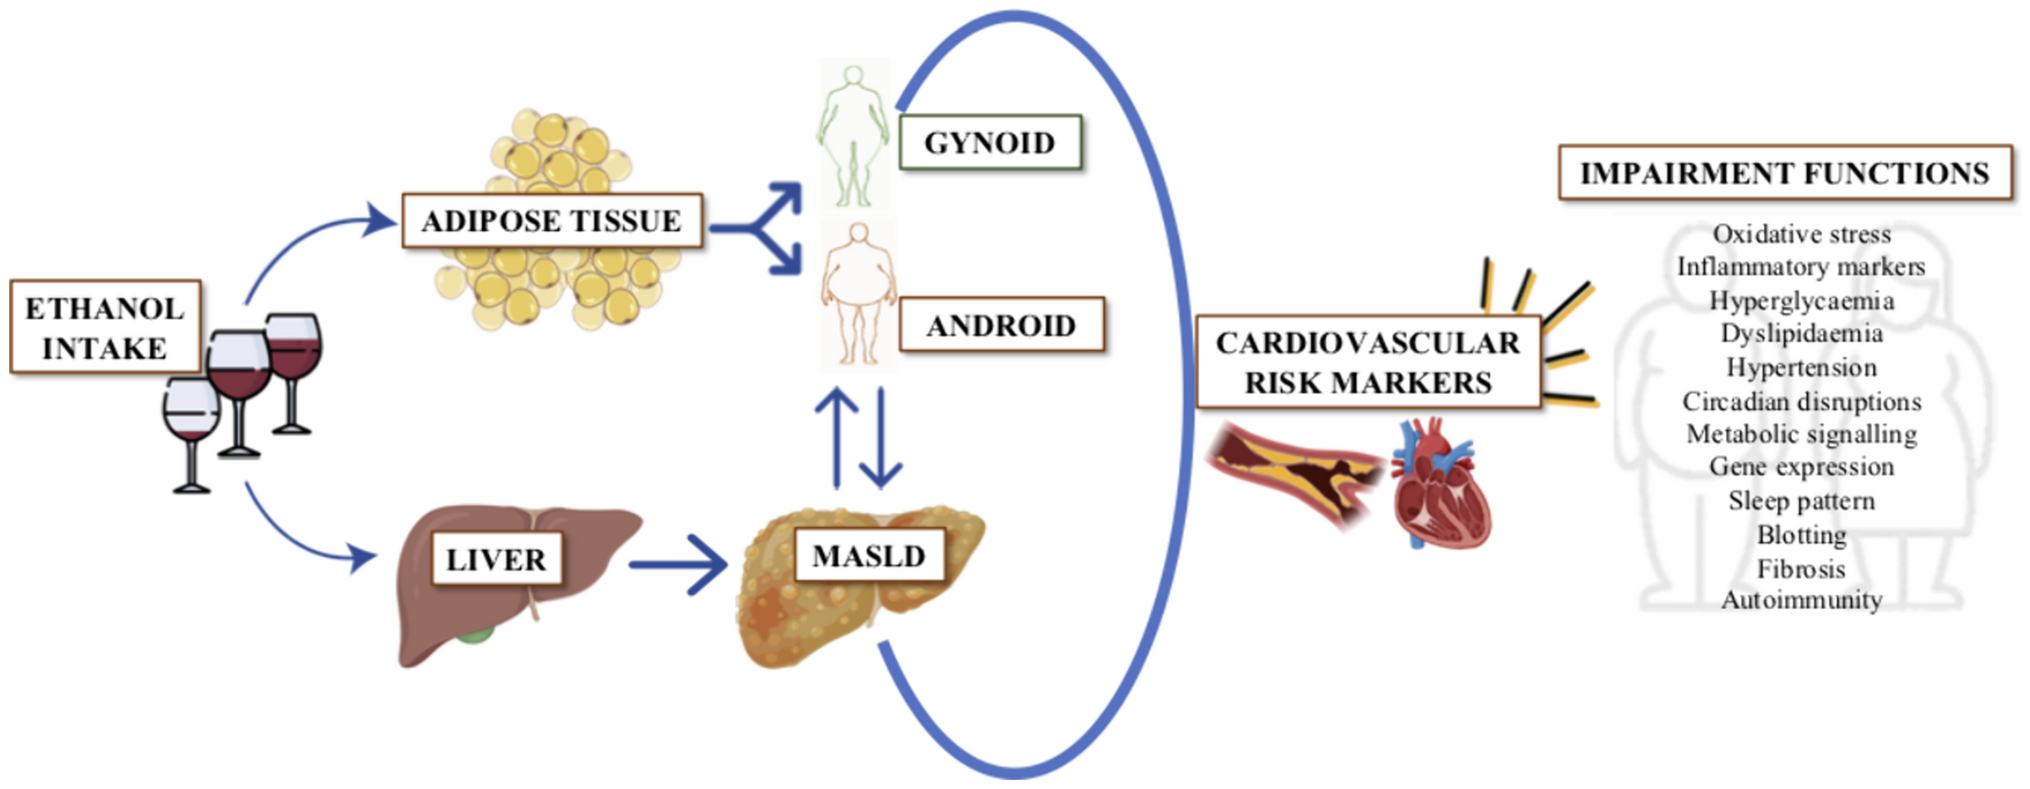 Alcohol Drinking Impacts on Adiposity and Steatotic Liver Disease: Concurrent Effects on Metabolic Pathways and Cardiovascular Risks